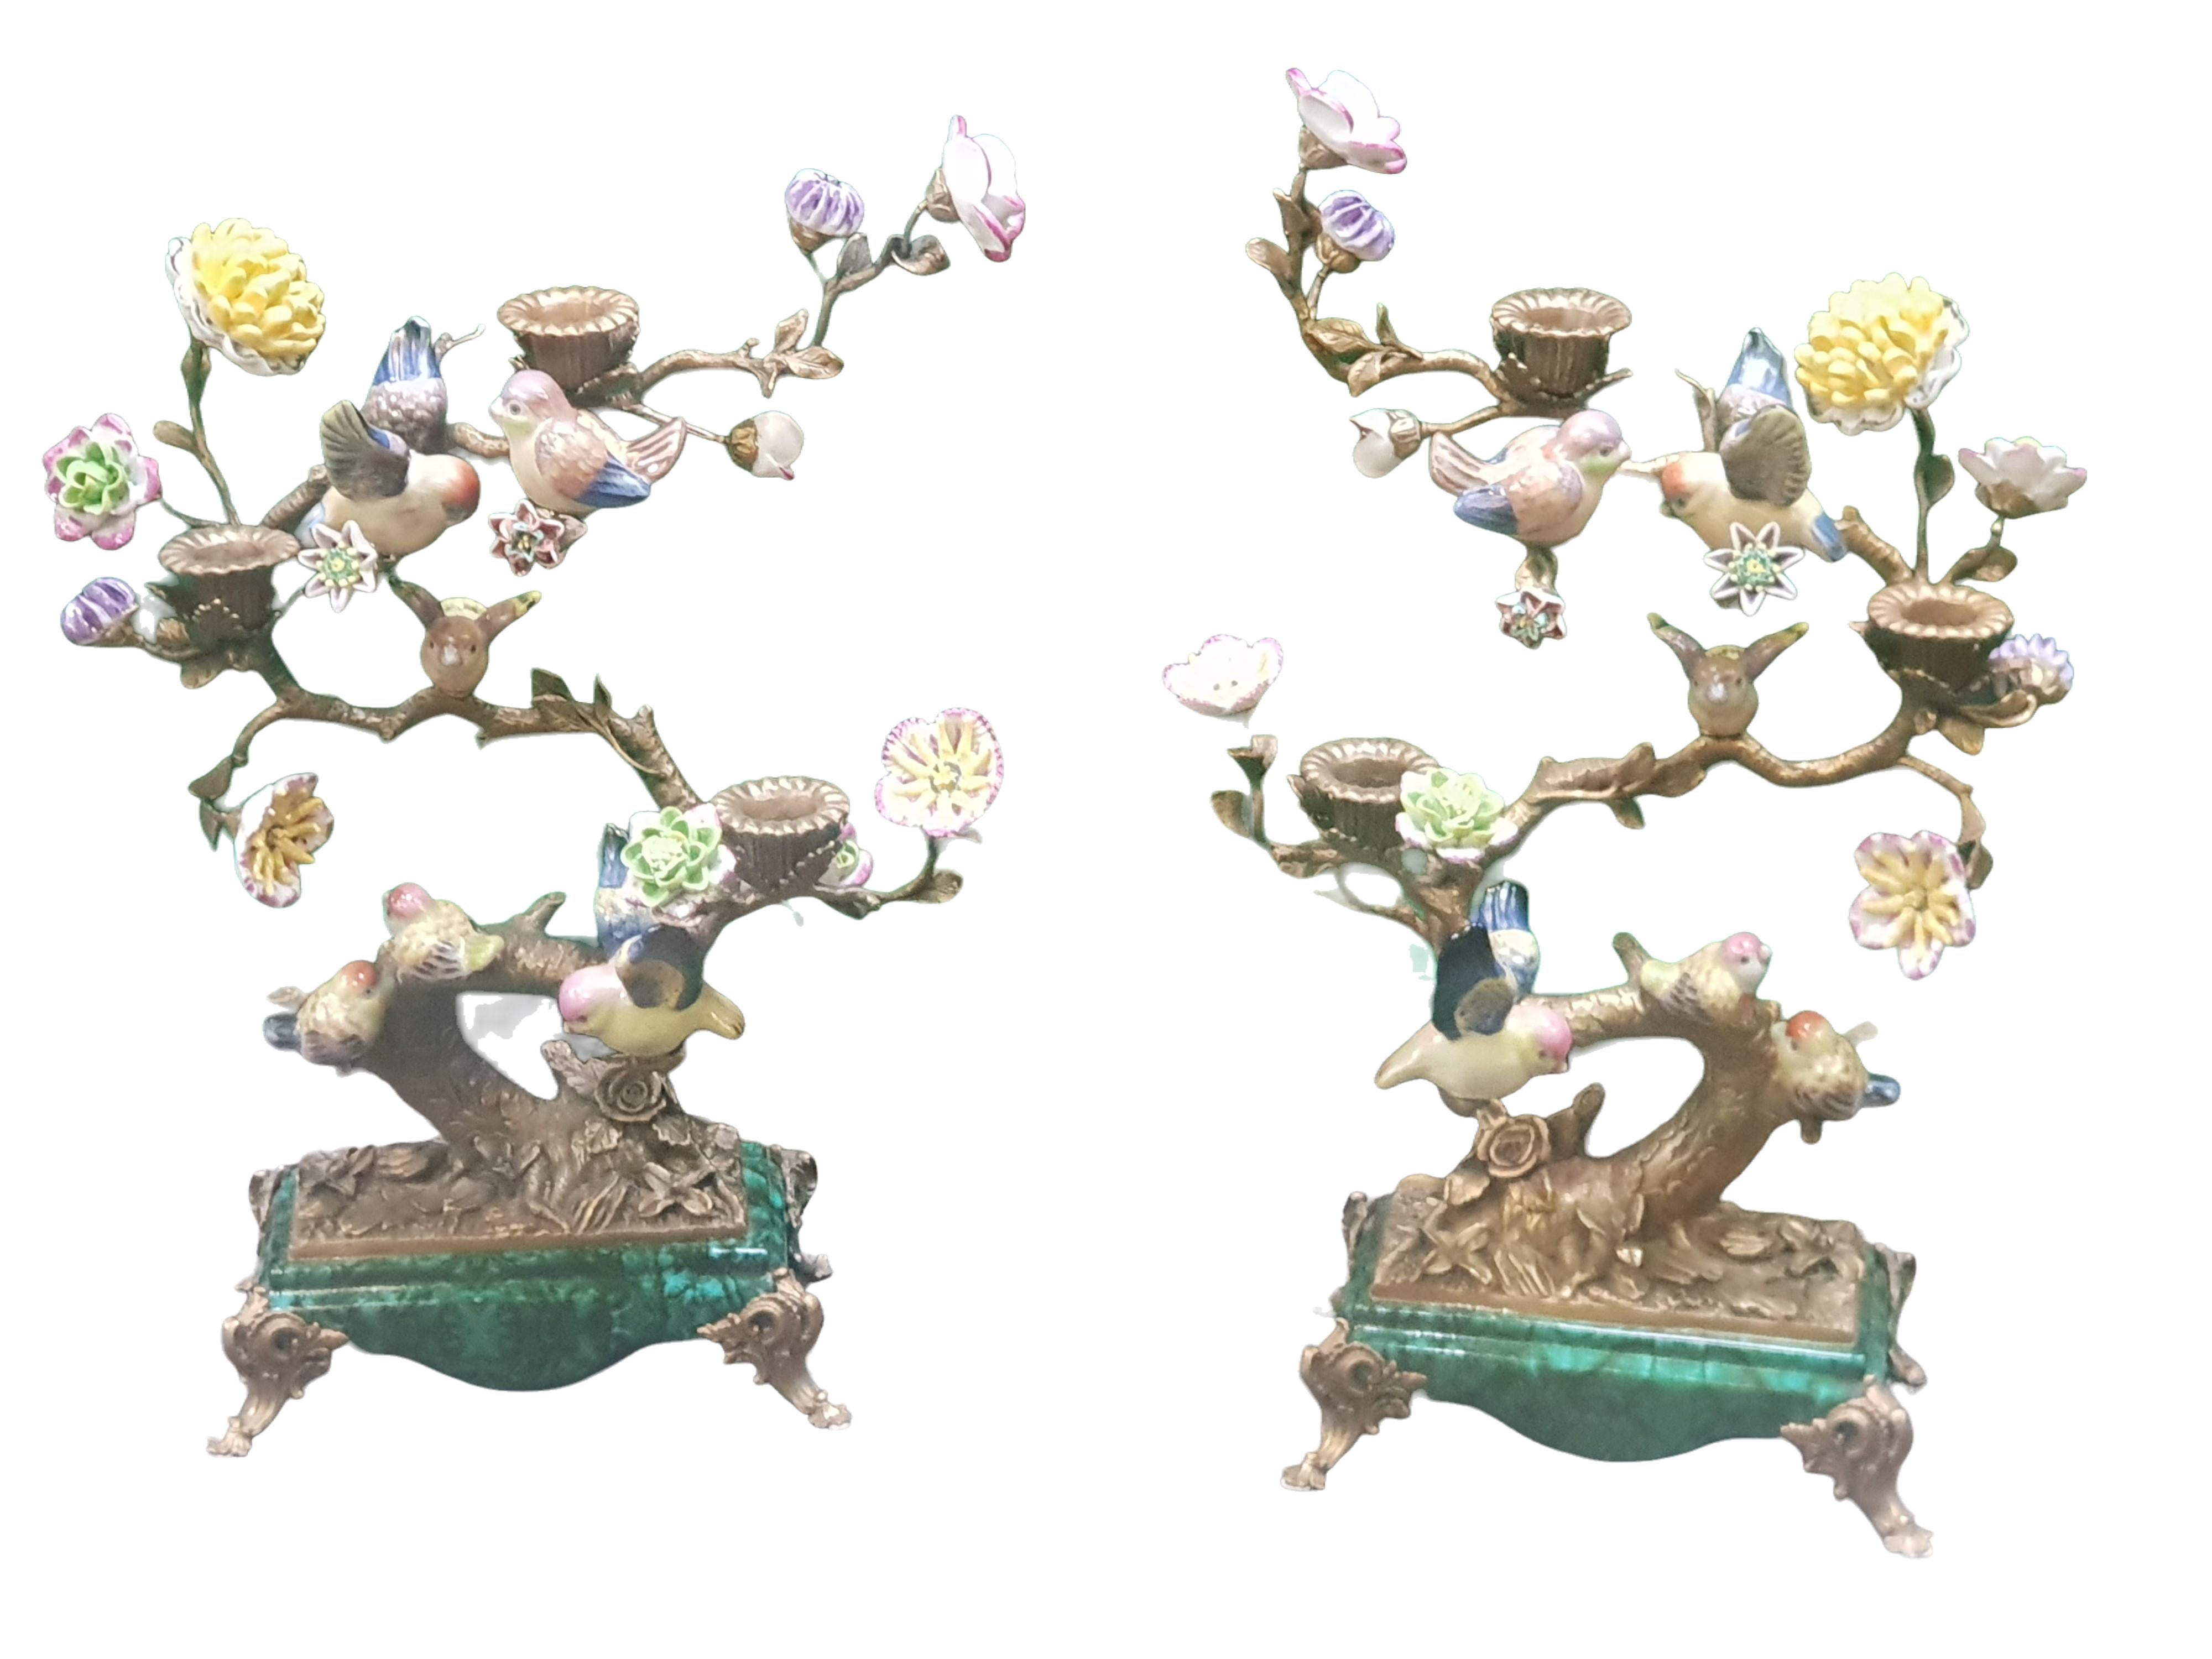 A Delightful Pair of Tree of Life Candelabras
Each Branch has Hand Painted Porcelain FLowers and Birds
Each candelabra is on a Faux Malachite Base.